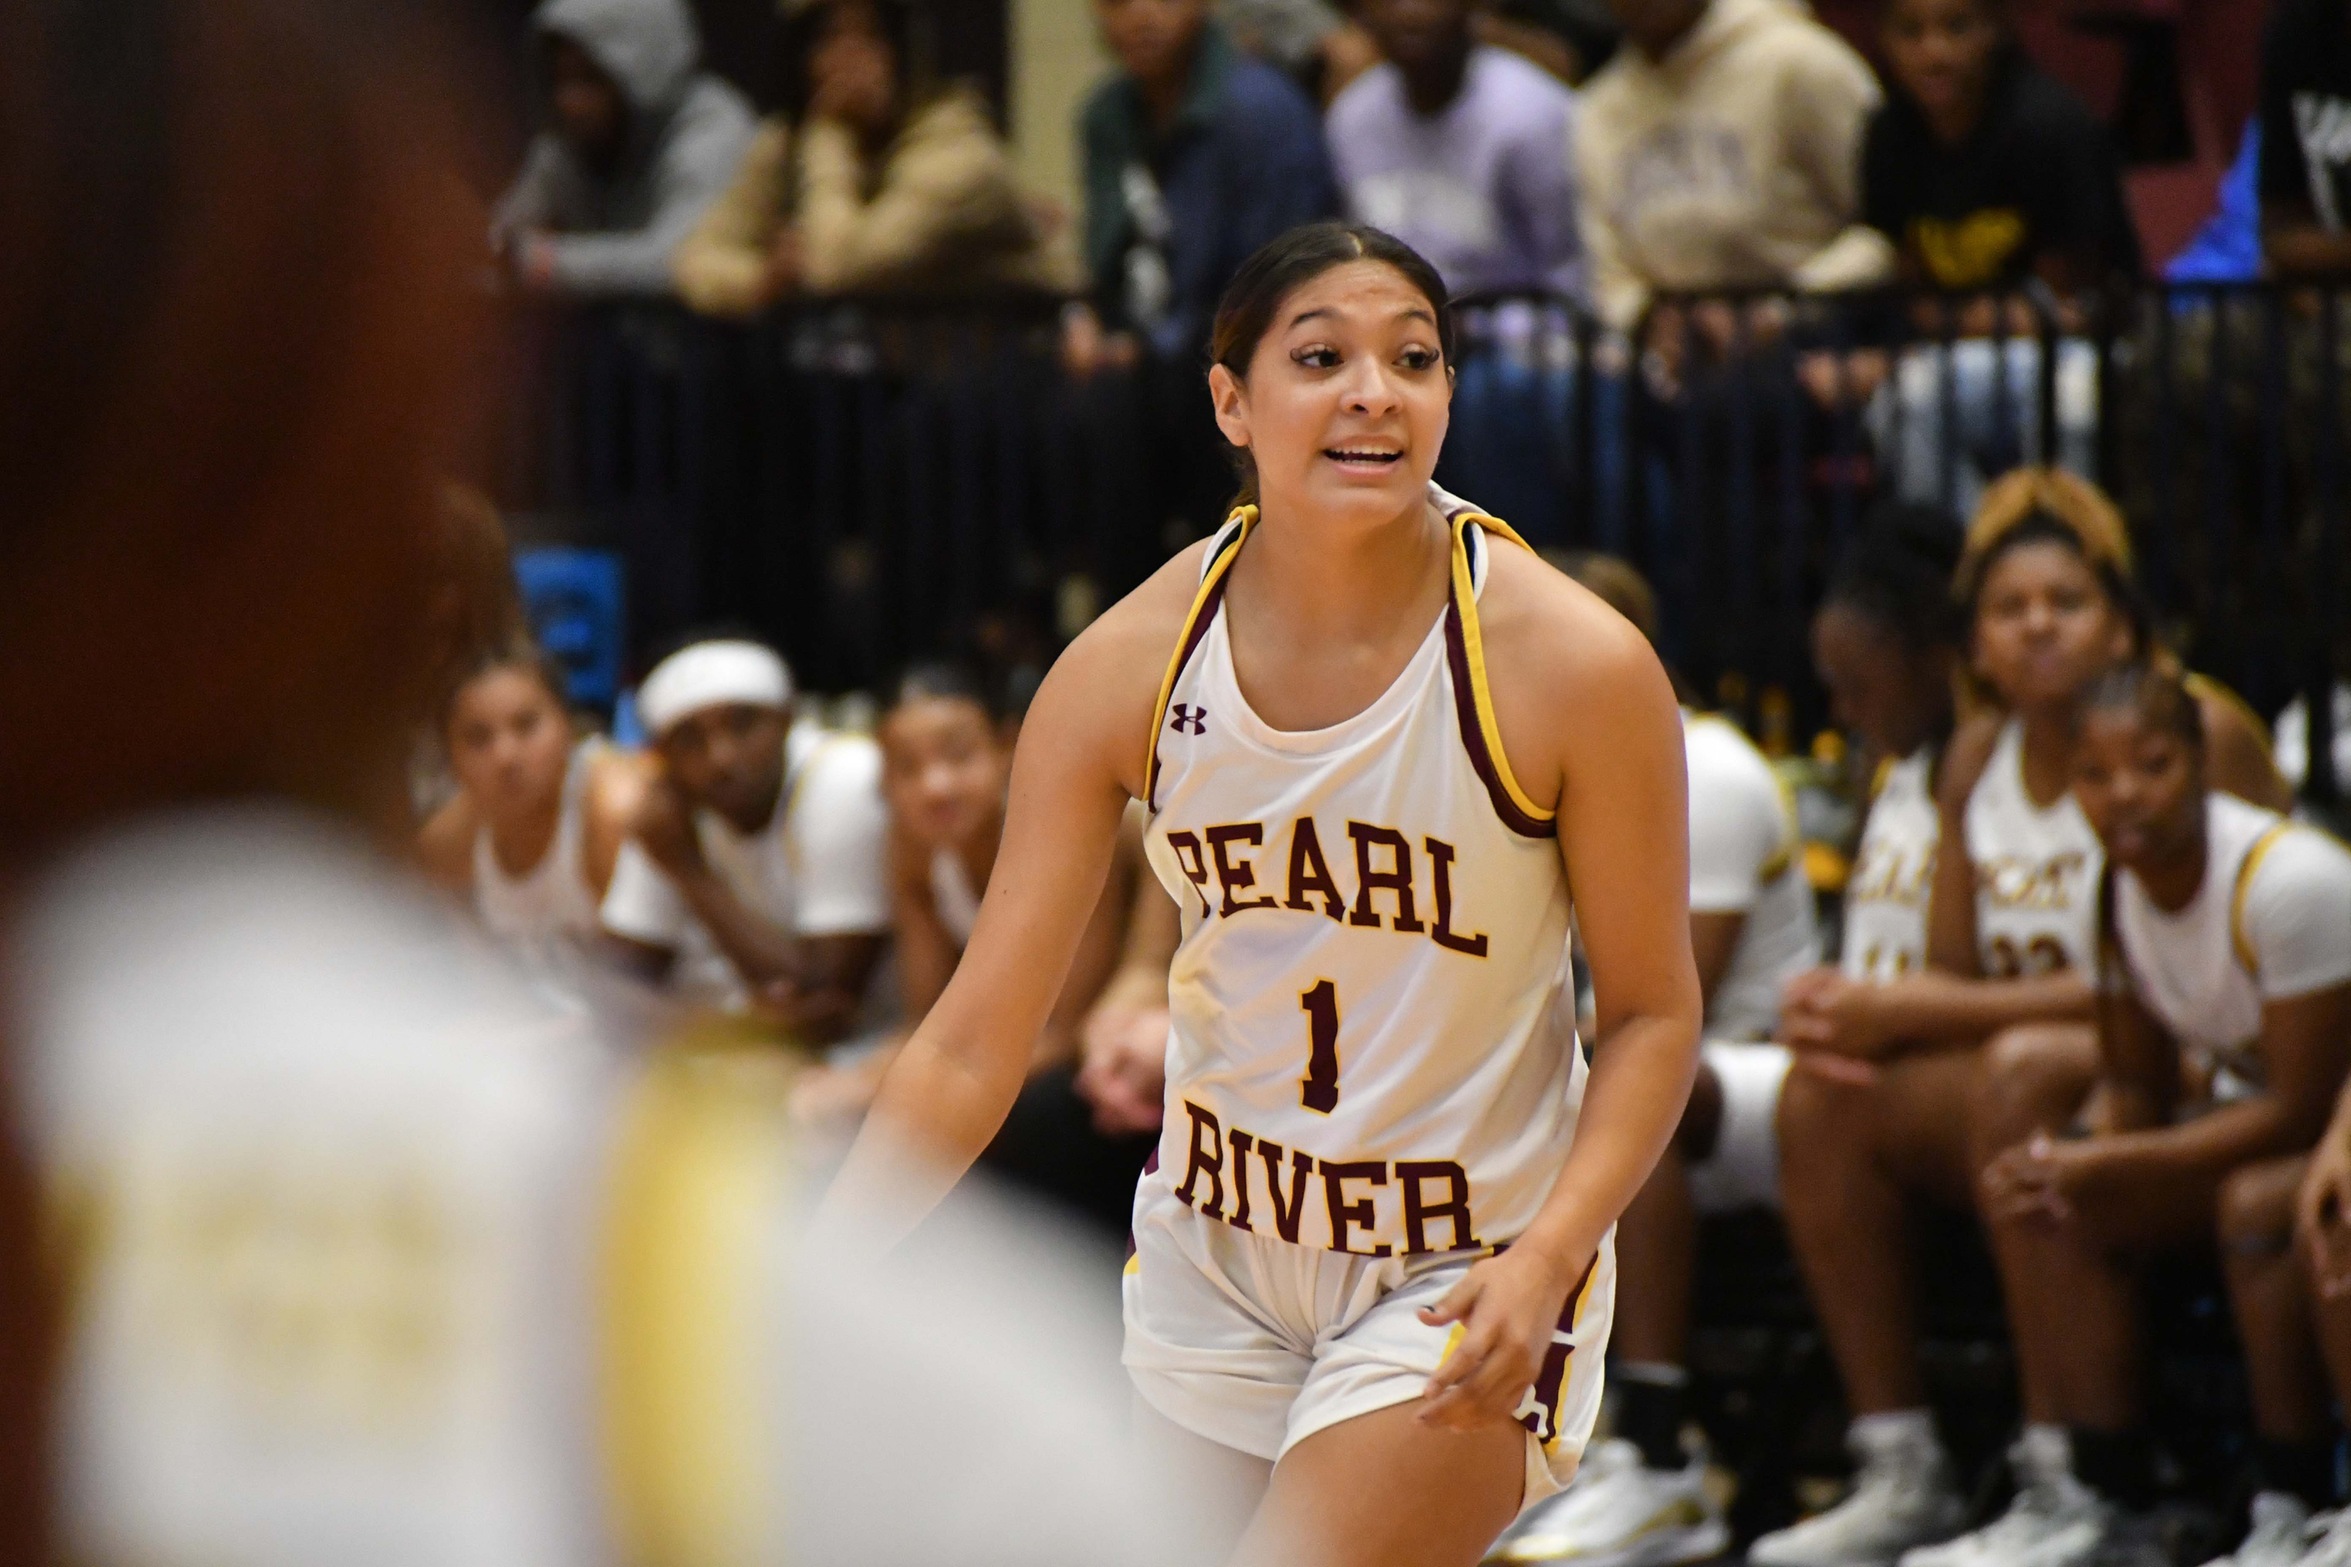 Pearl River gets back into the win column with an emphatic win over Northwest